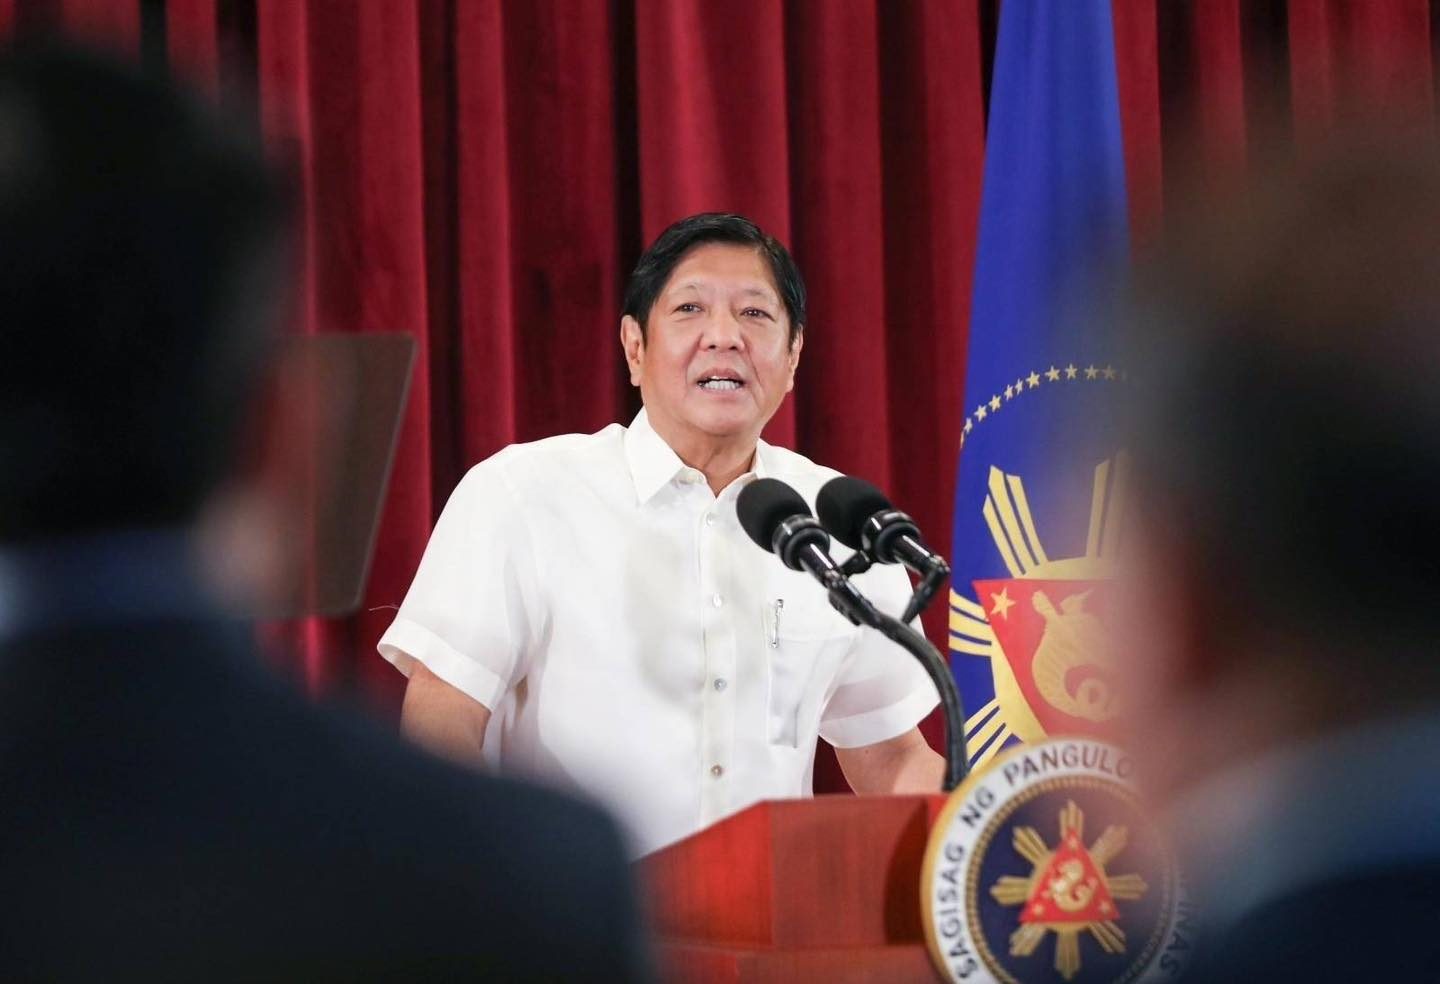 Marcos headed to Japan on December 15 for ASEAN-Japan Summit